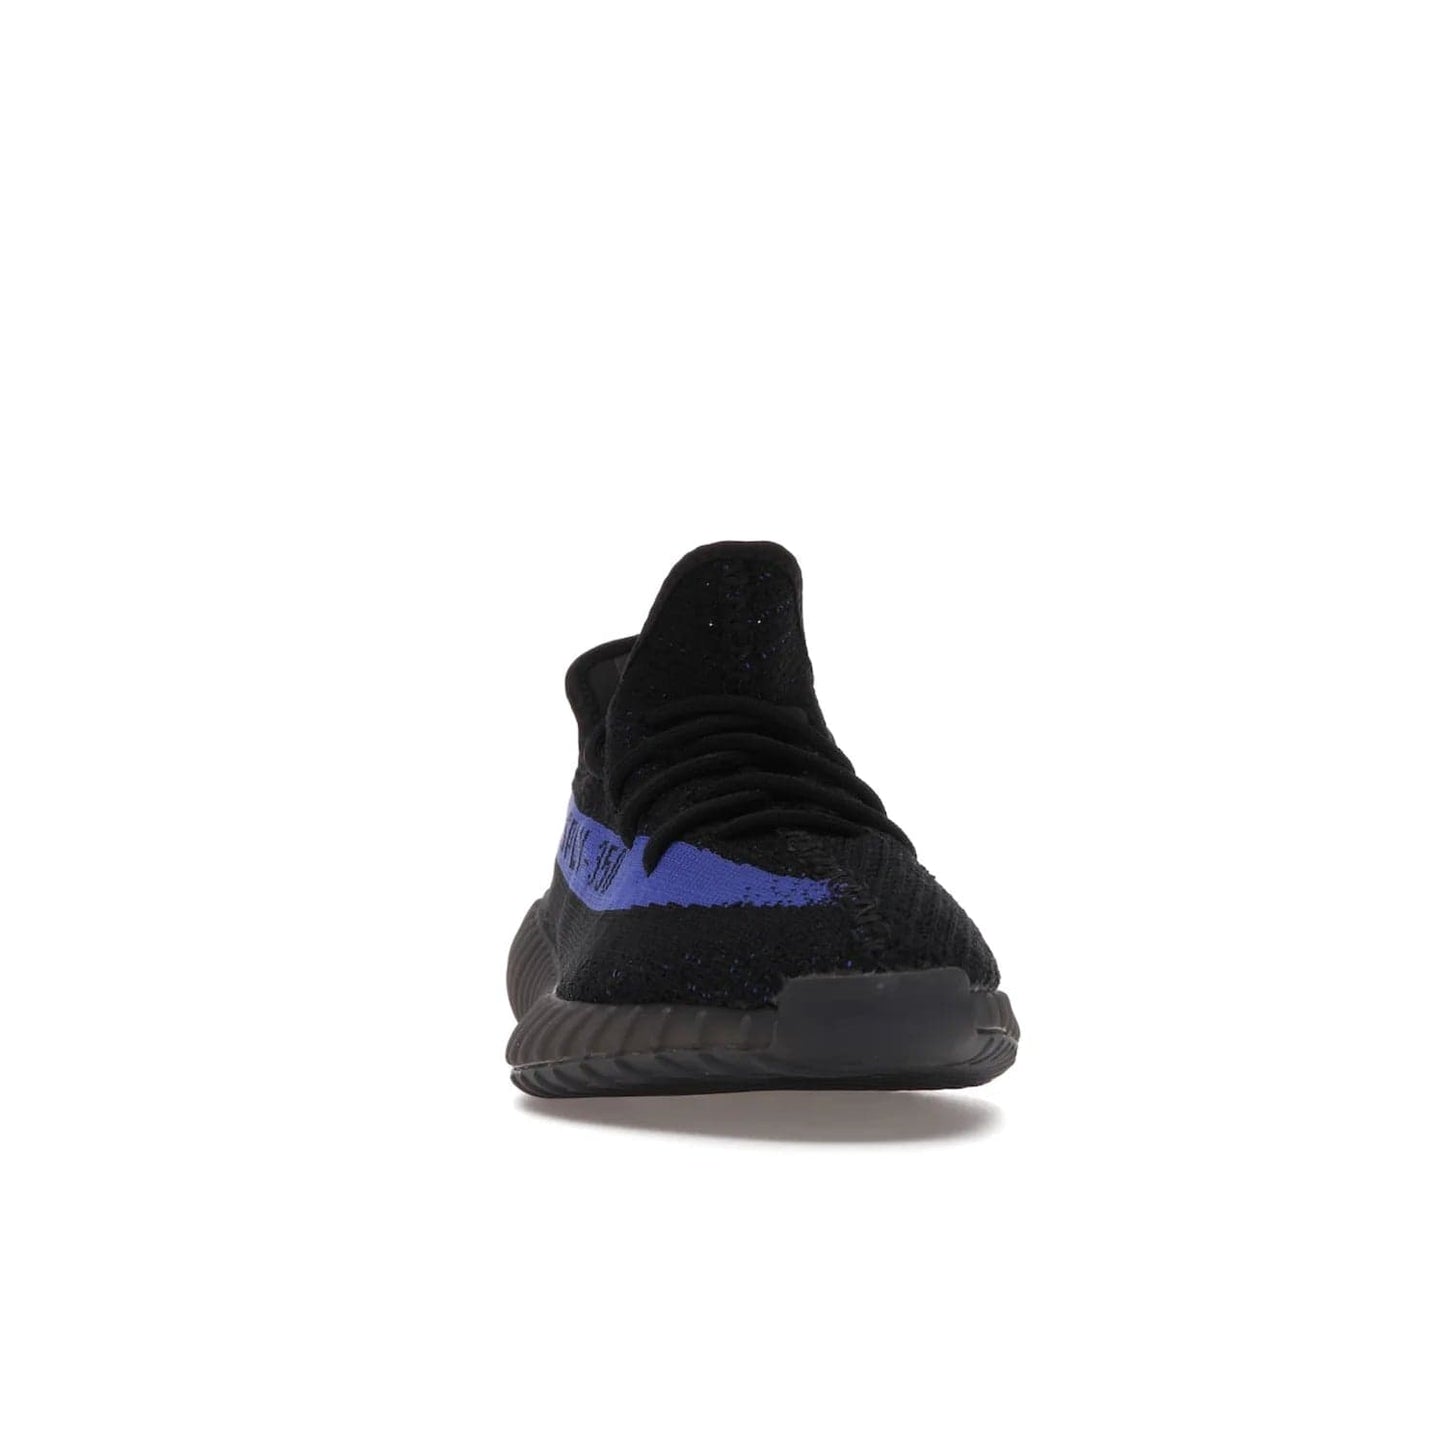 adidas Yeezy Boost 350 V2 Dazzling Blue - Image 9 - Only at www.BallersClubKickz.com - Shop the Adidas Yeezy 350 V2 Dazzling Blue, featuring a solid black Primeknit upper, Dazzling Blue side stripe, “SPLY-350” text, and a muted Boost sole. Releasing Feb 2022, this style is perfect for any shoe fan.